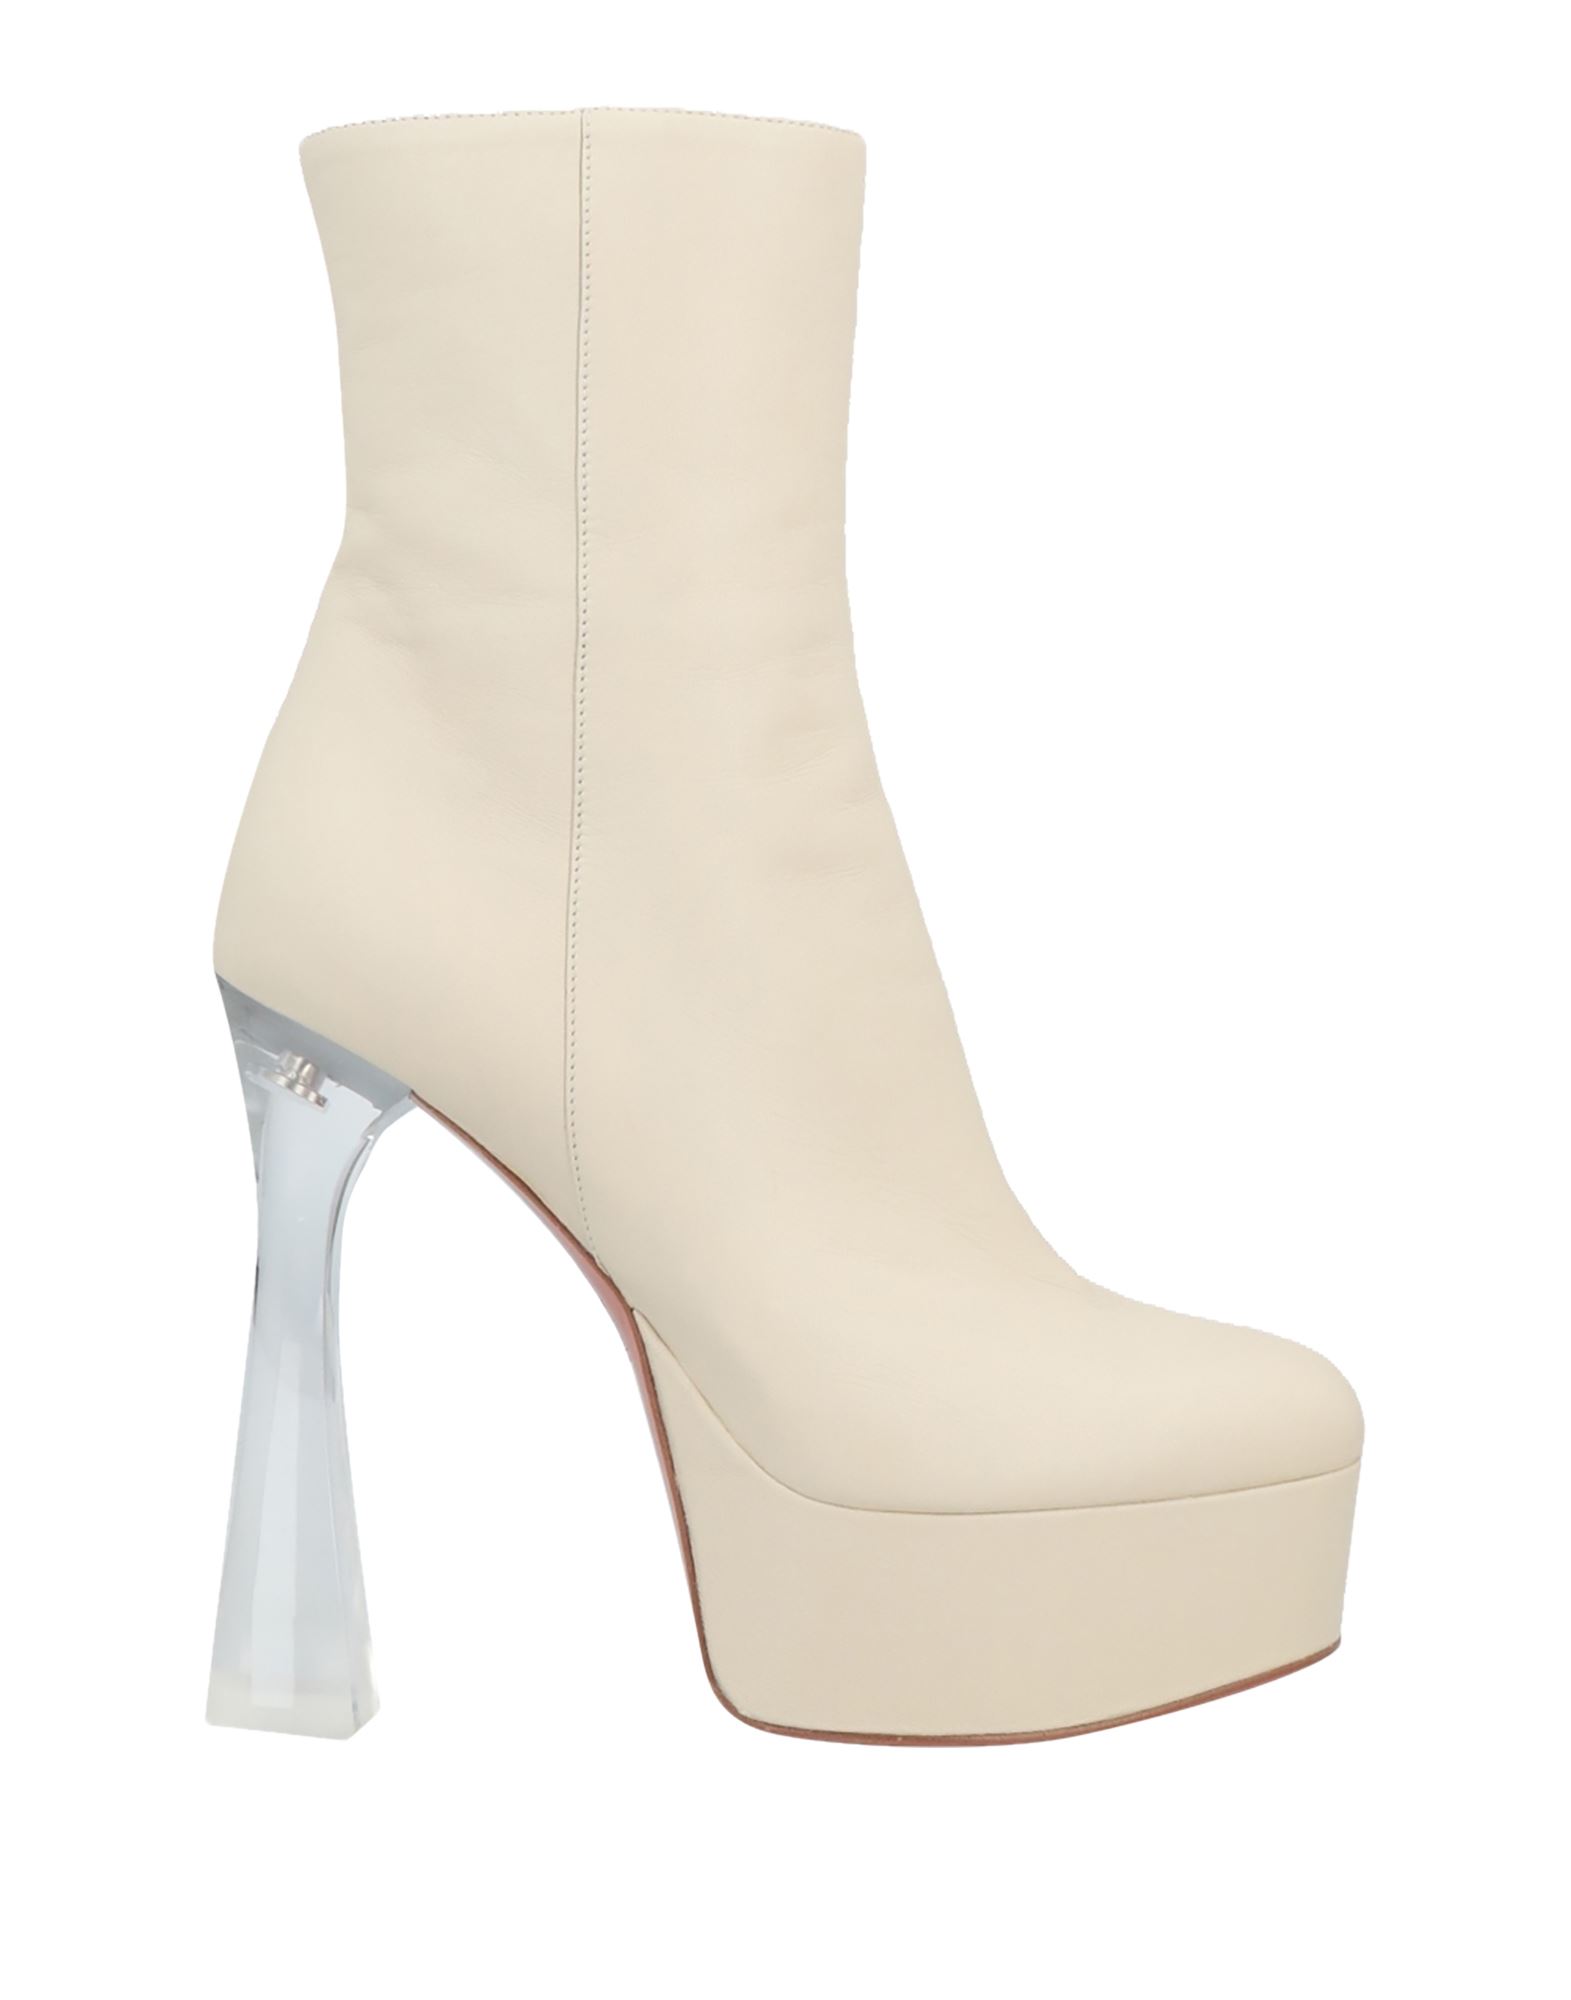 Amina Muaddi Ankle Boots In Ivory